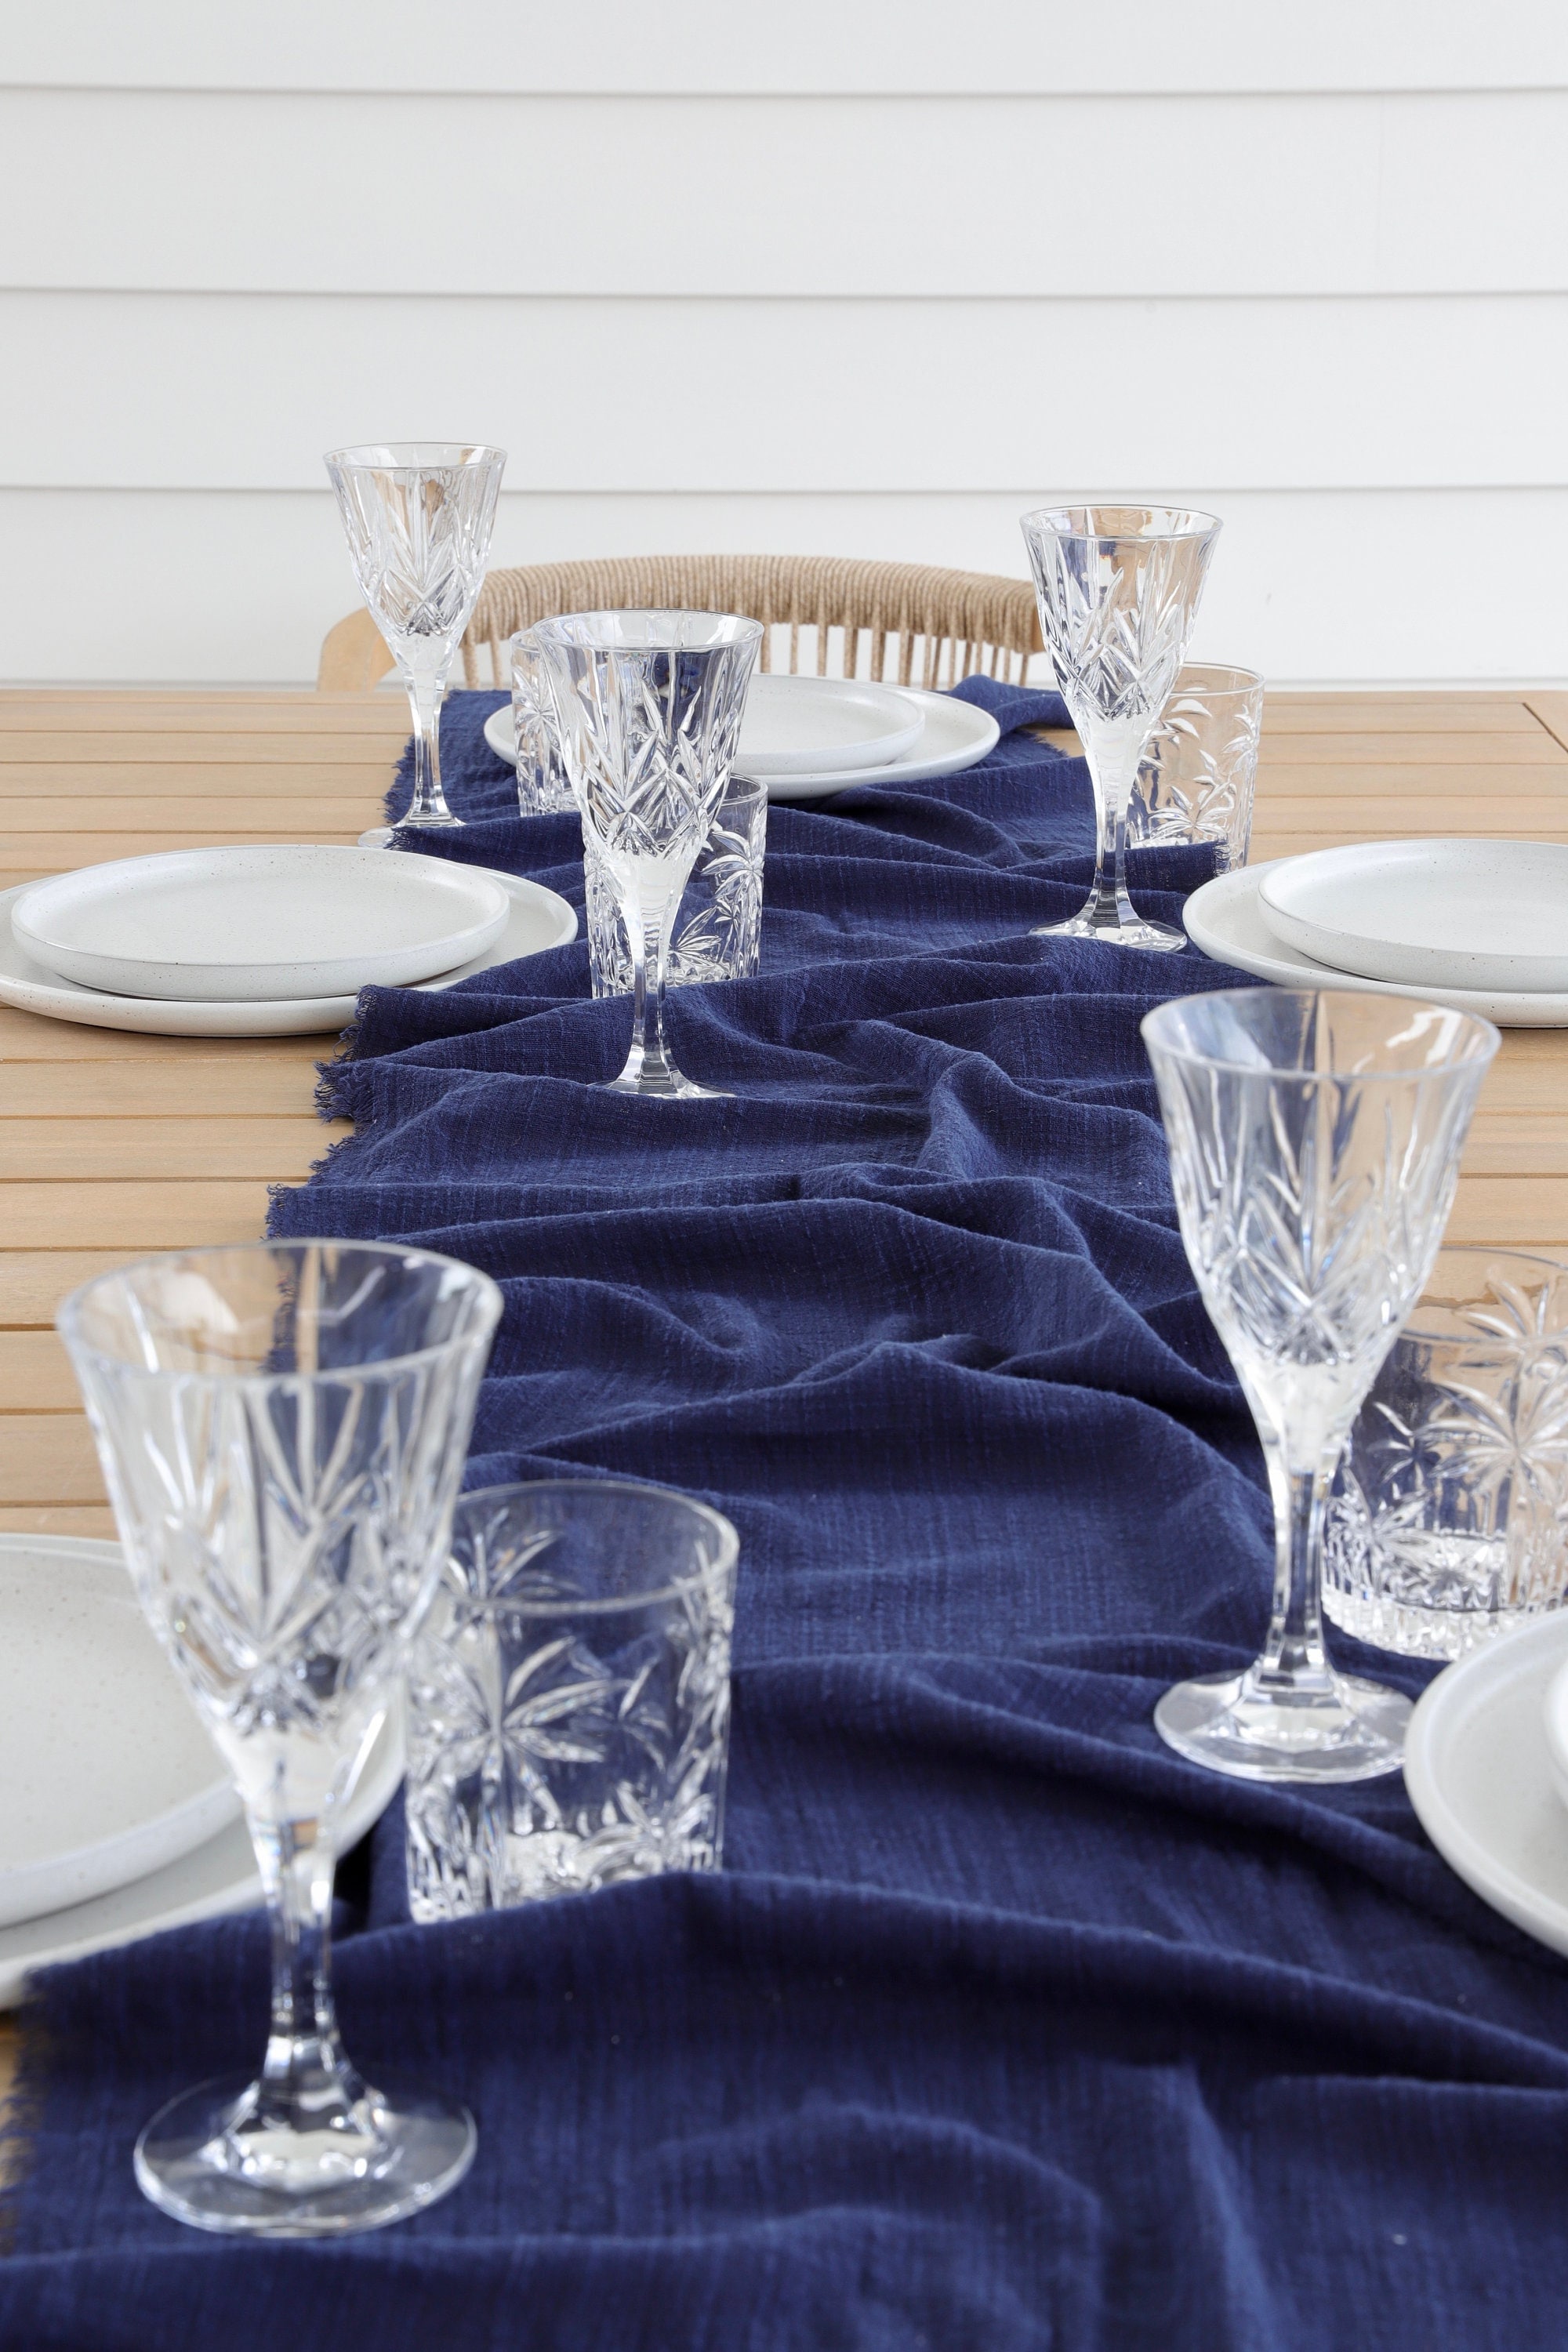 Natural Sea Grass Table Runner Organic and Eco-chic Dining Accent